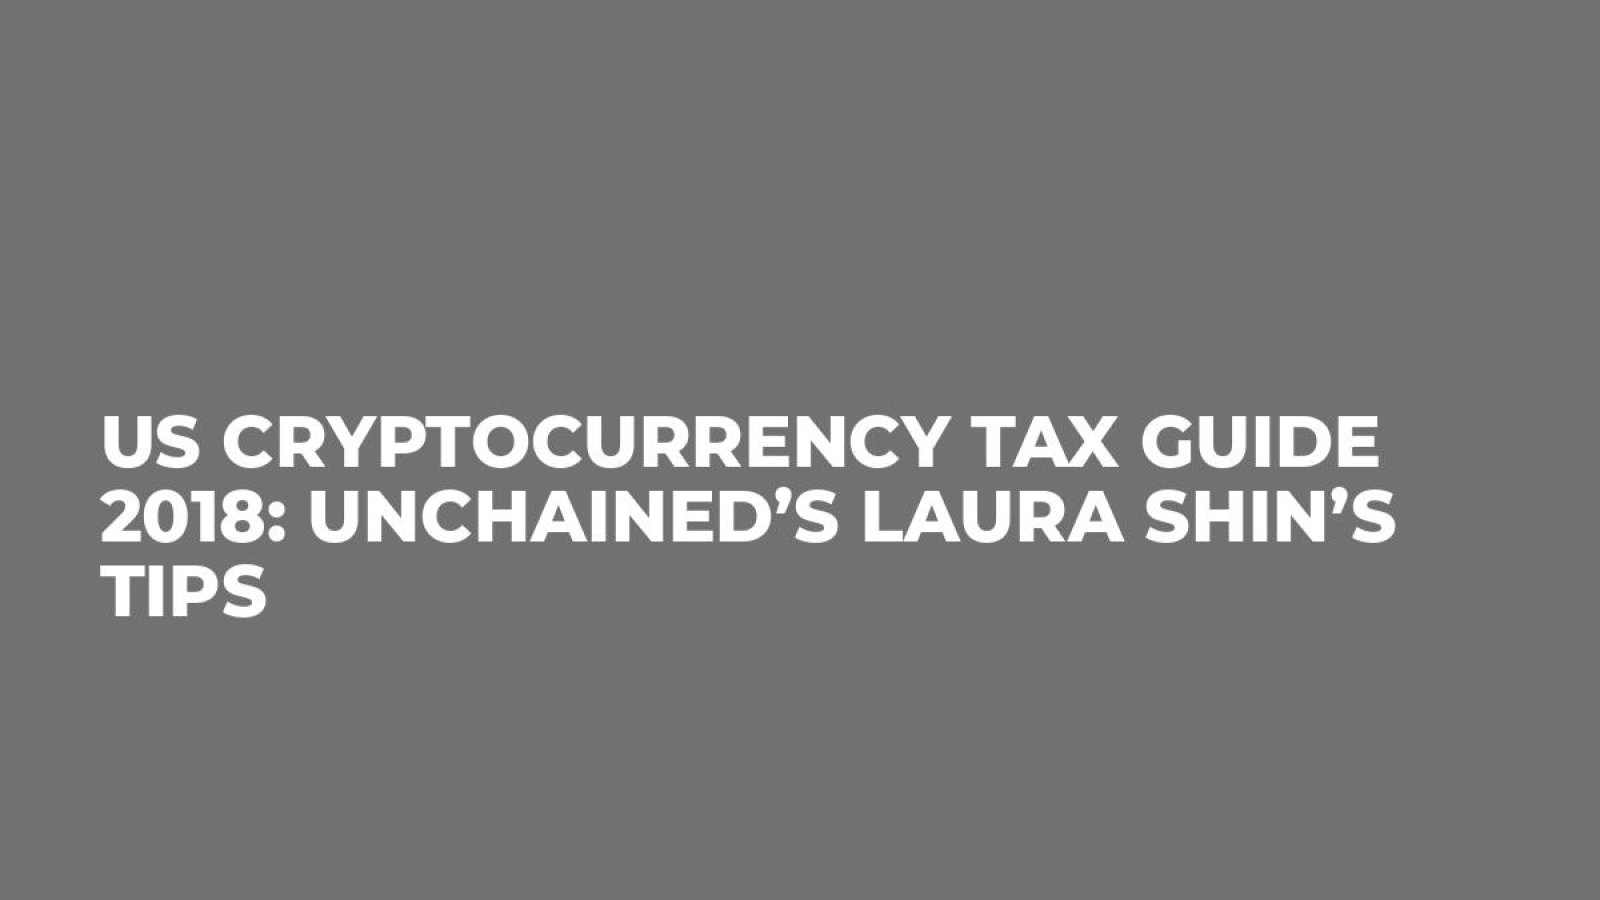 US Cryptocurrency Tax Guide 2018: Unchained’s Laura Shin’s Tips